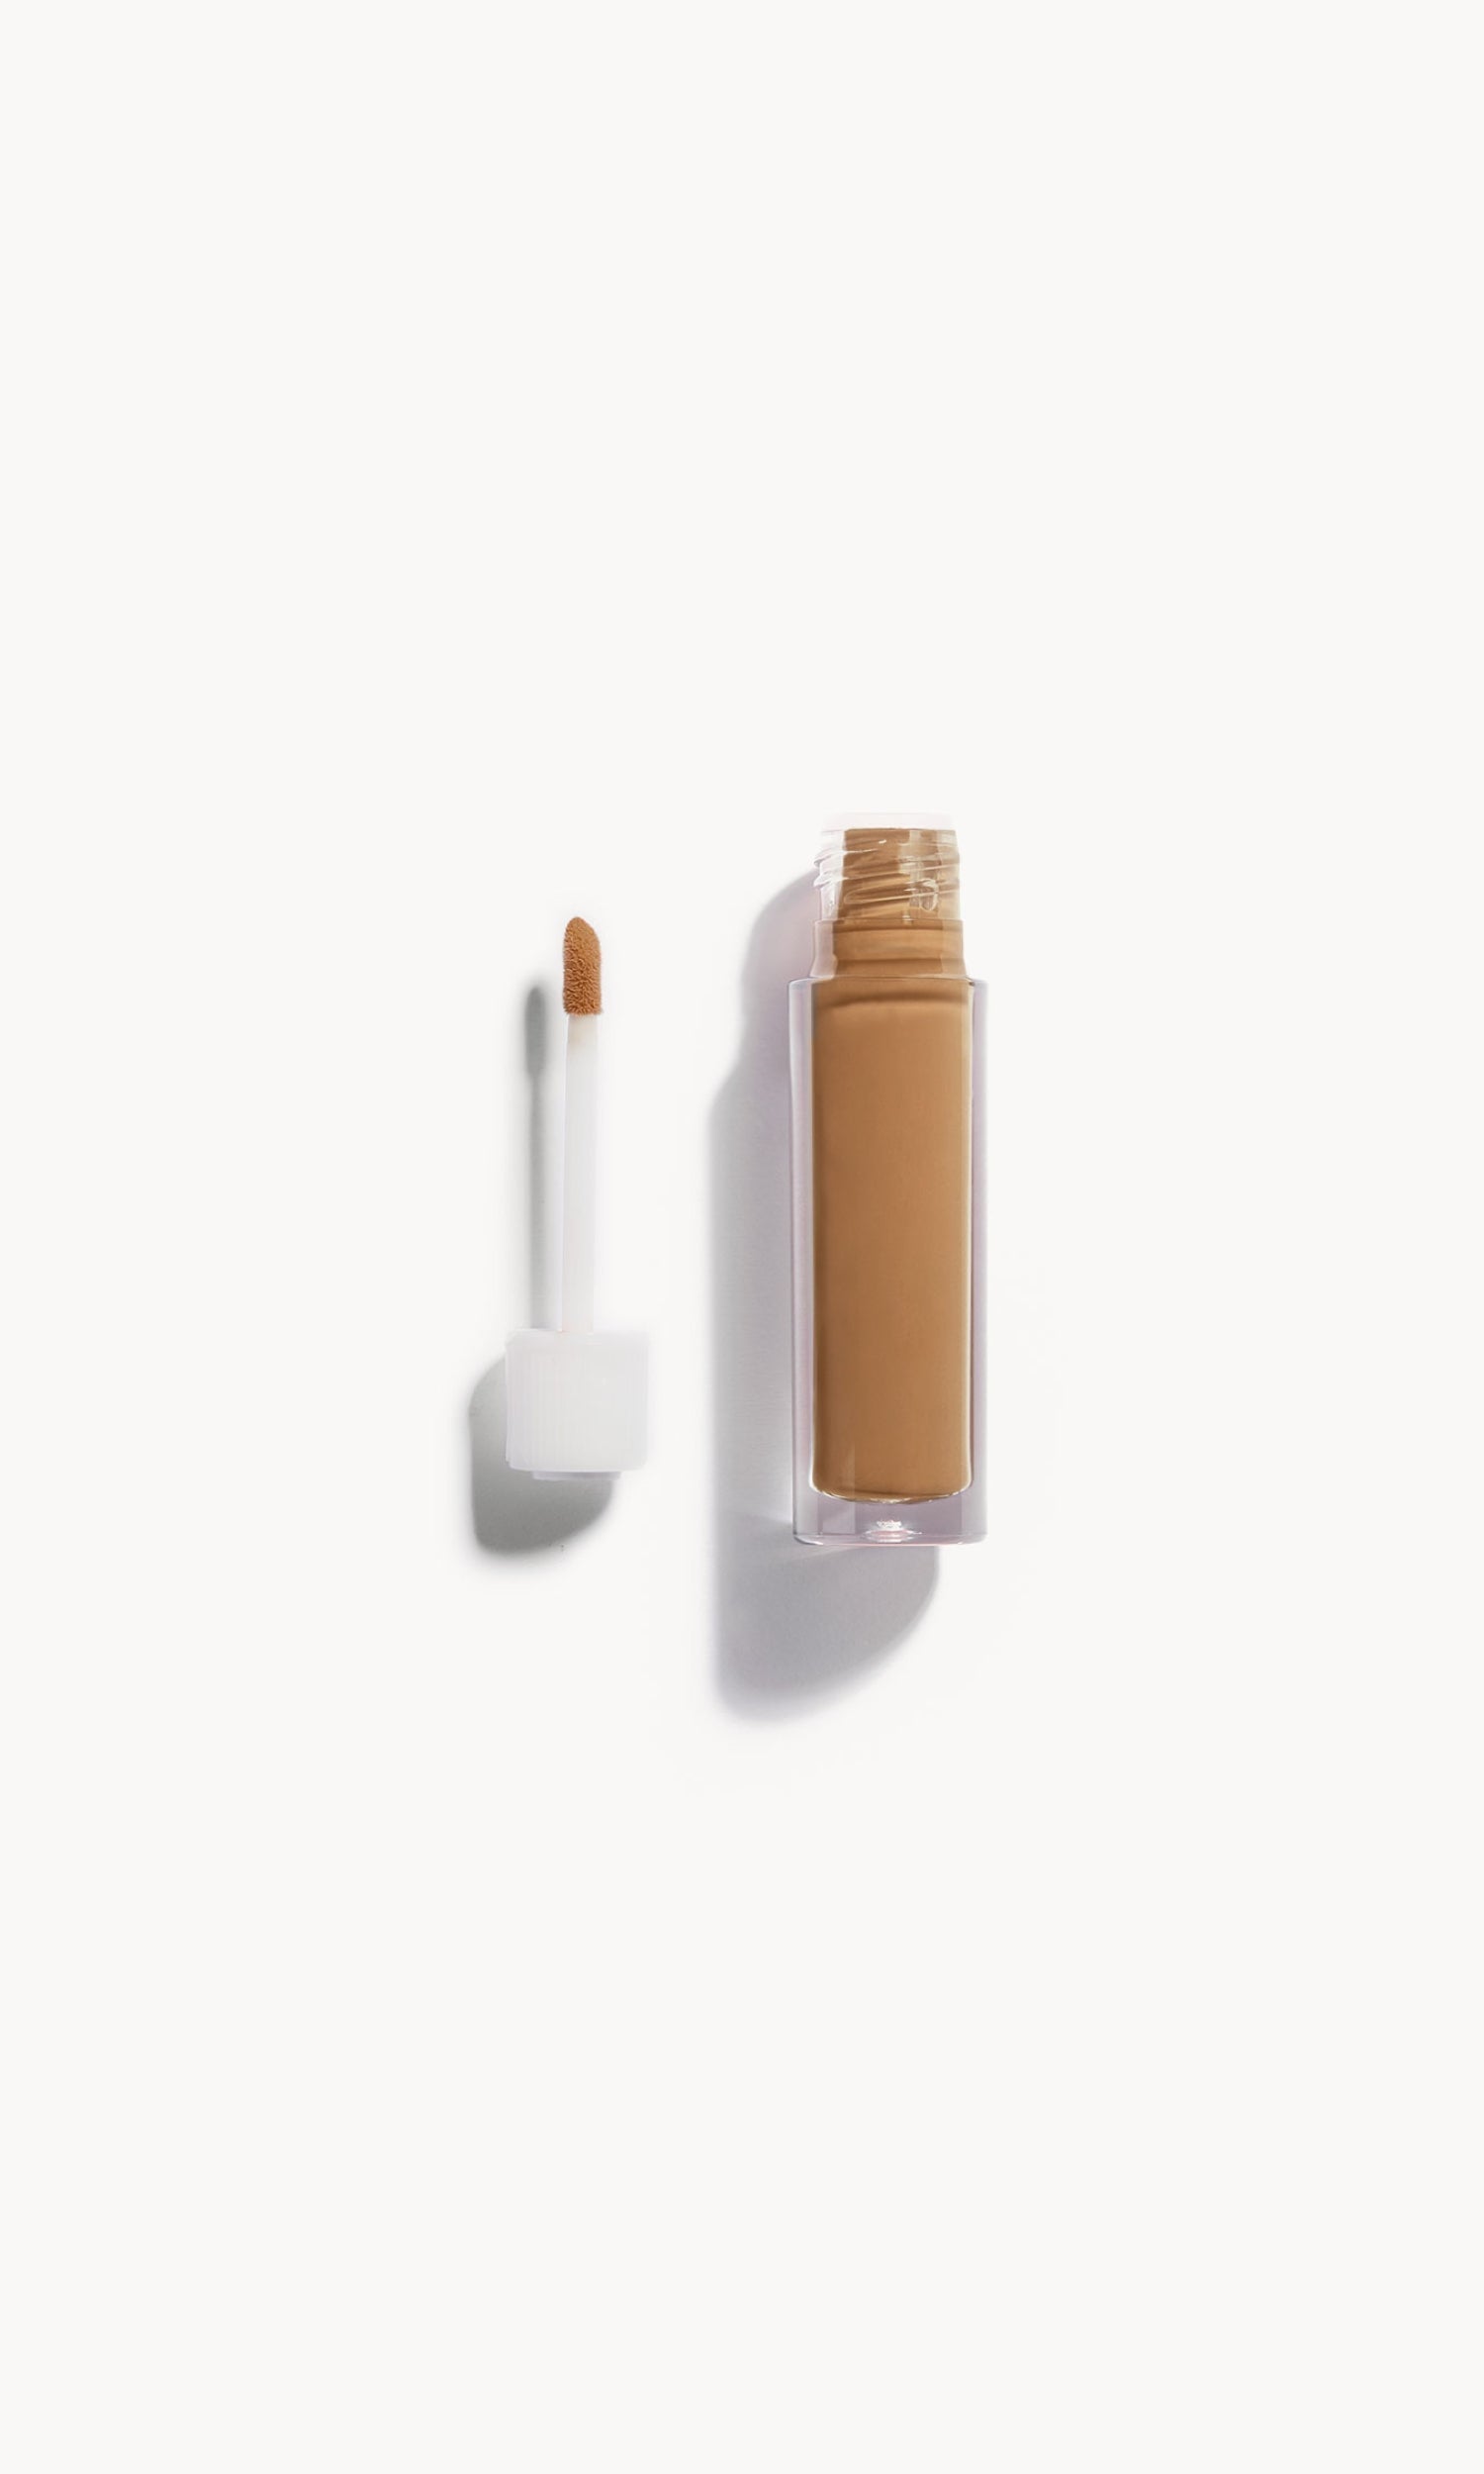 alt text: an open bottle of concealer on its side next to a white refill wand